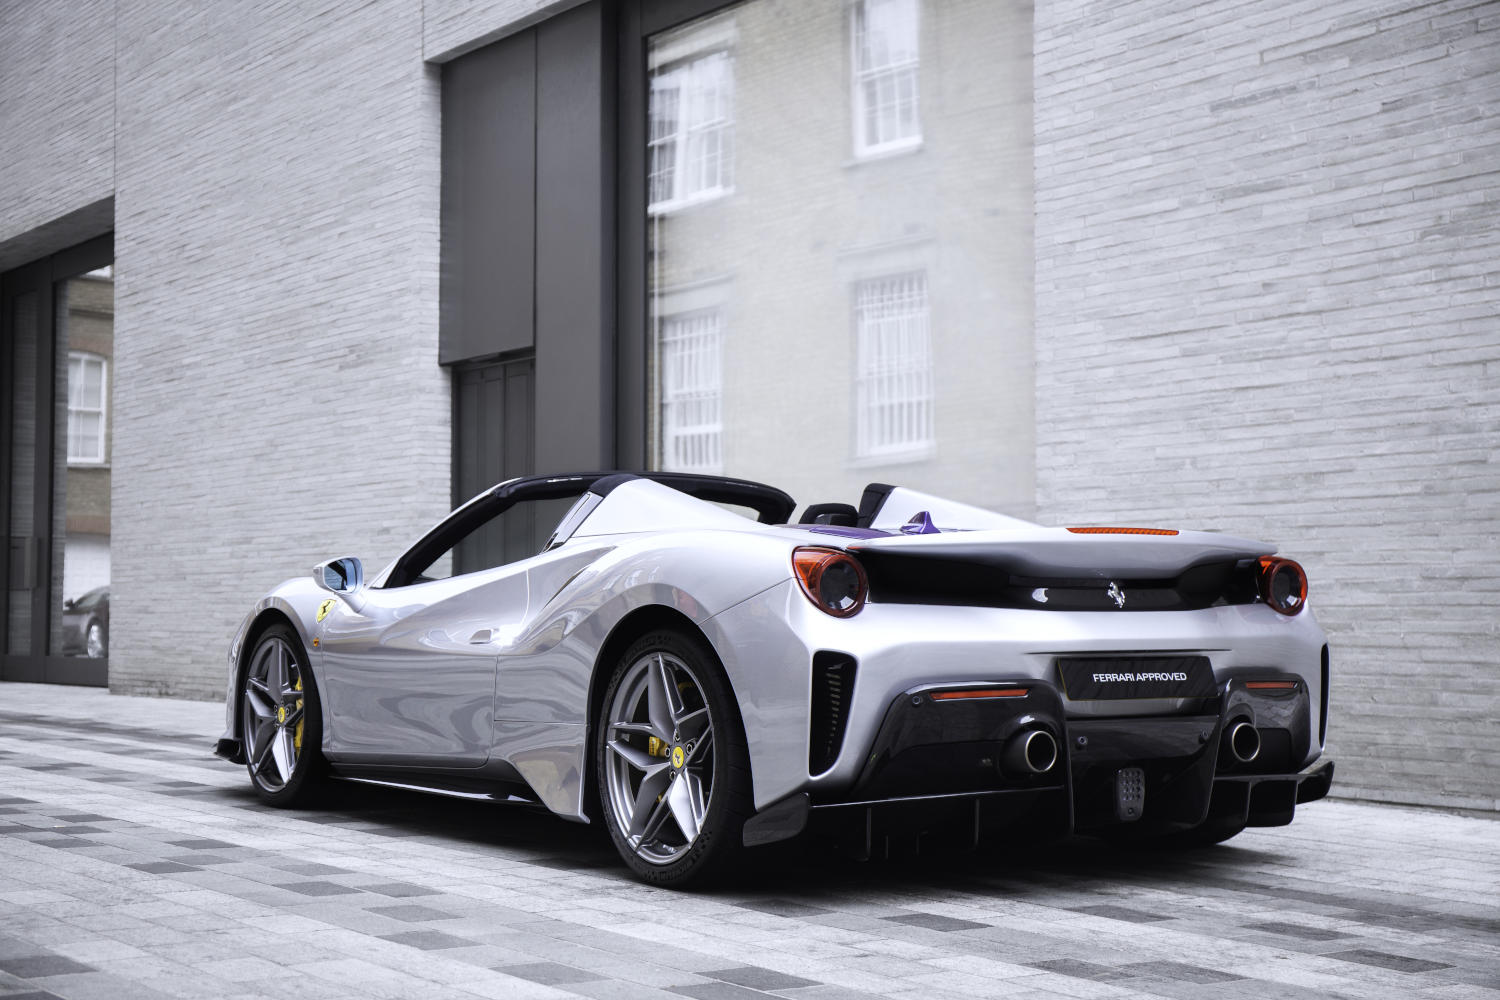 Some PPP loans were used to buy Ferrari supercars like this 488